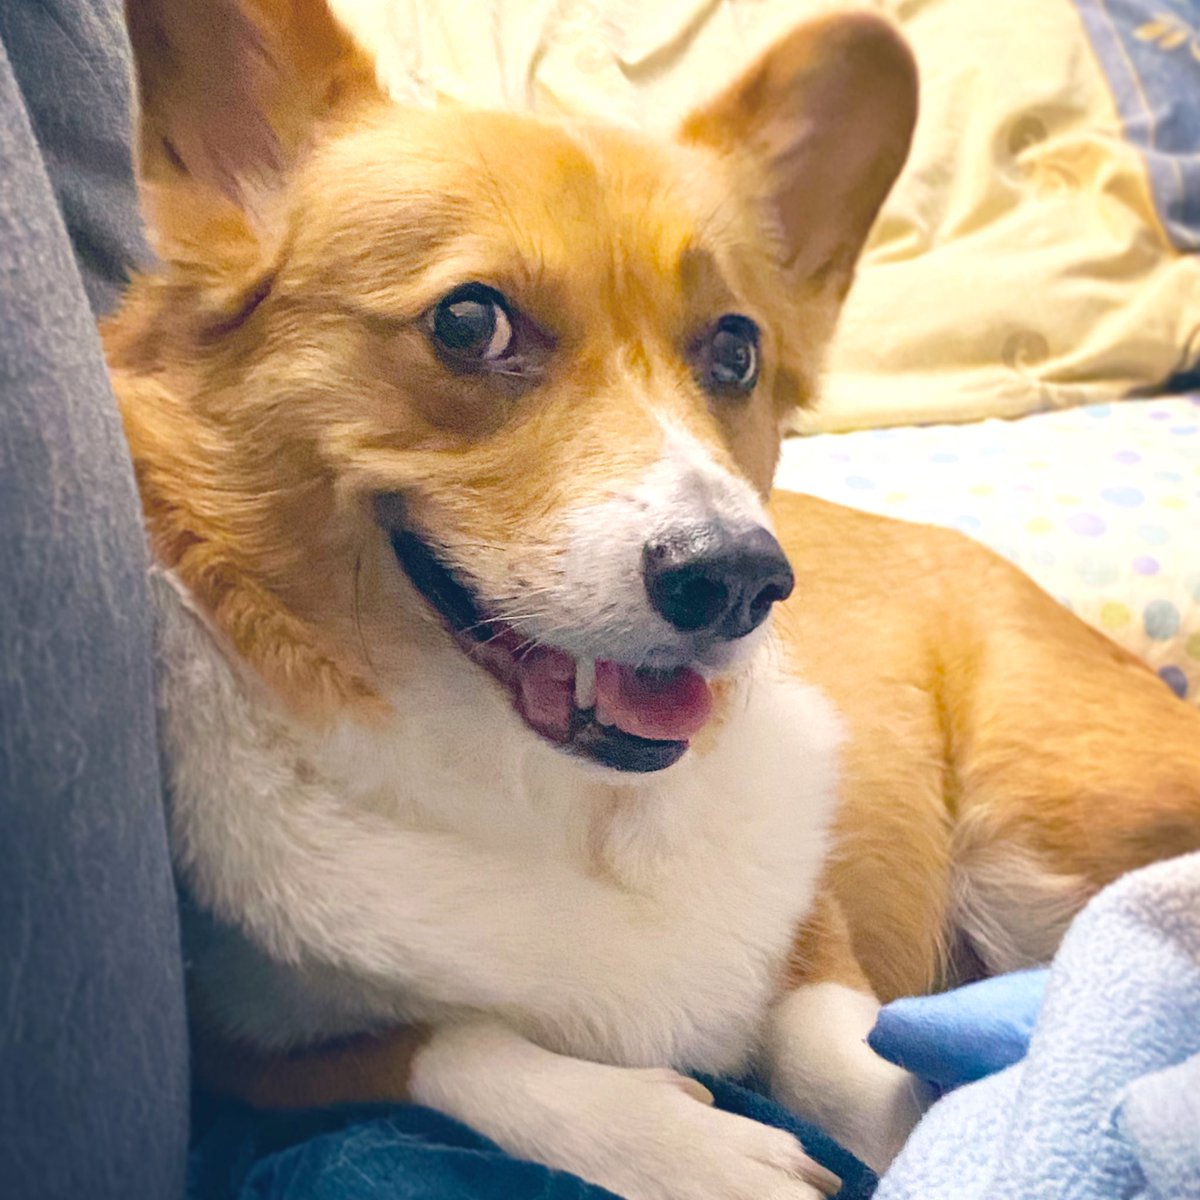 Good morning ☀️
-
Hope everyone is having a wonderful #Thursday 🥰
-
#CorgiSmiles for everyone! #Friday is tomorrow and the #weekend is soo close! 😆🎉 Almost there!
-
Stay safe everyone❤️ #corgilove #corgilife #spoileddog #handsomeboy #gentleman #corgicrew